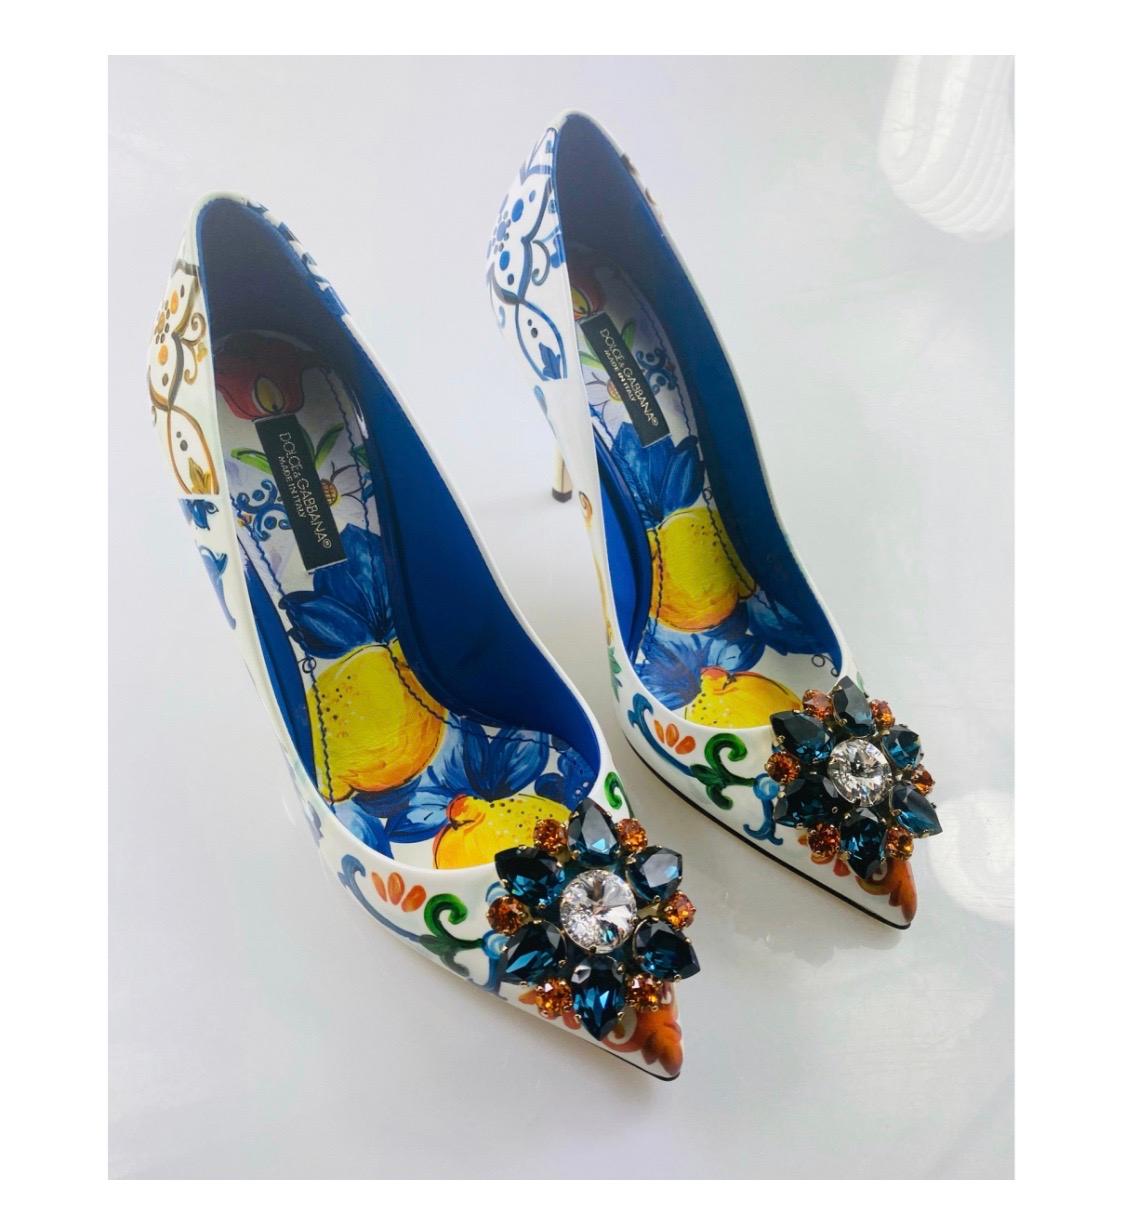 Dolce & Gabbana Sicily Maiolica
Taormina crystals heels shoes

Size 36, UK3
100% Vitello

Shoes are brand new but have slight
discolouration on both heels.

Come in the original DG box!
Please check my other DG clothing,
Sicily bag and accessories